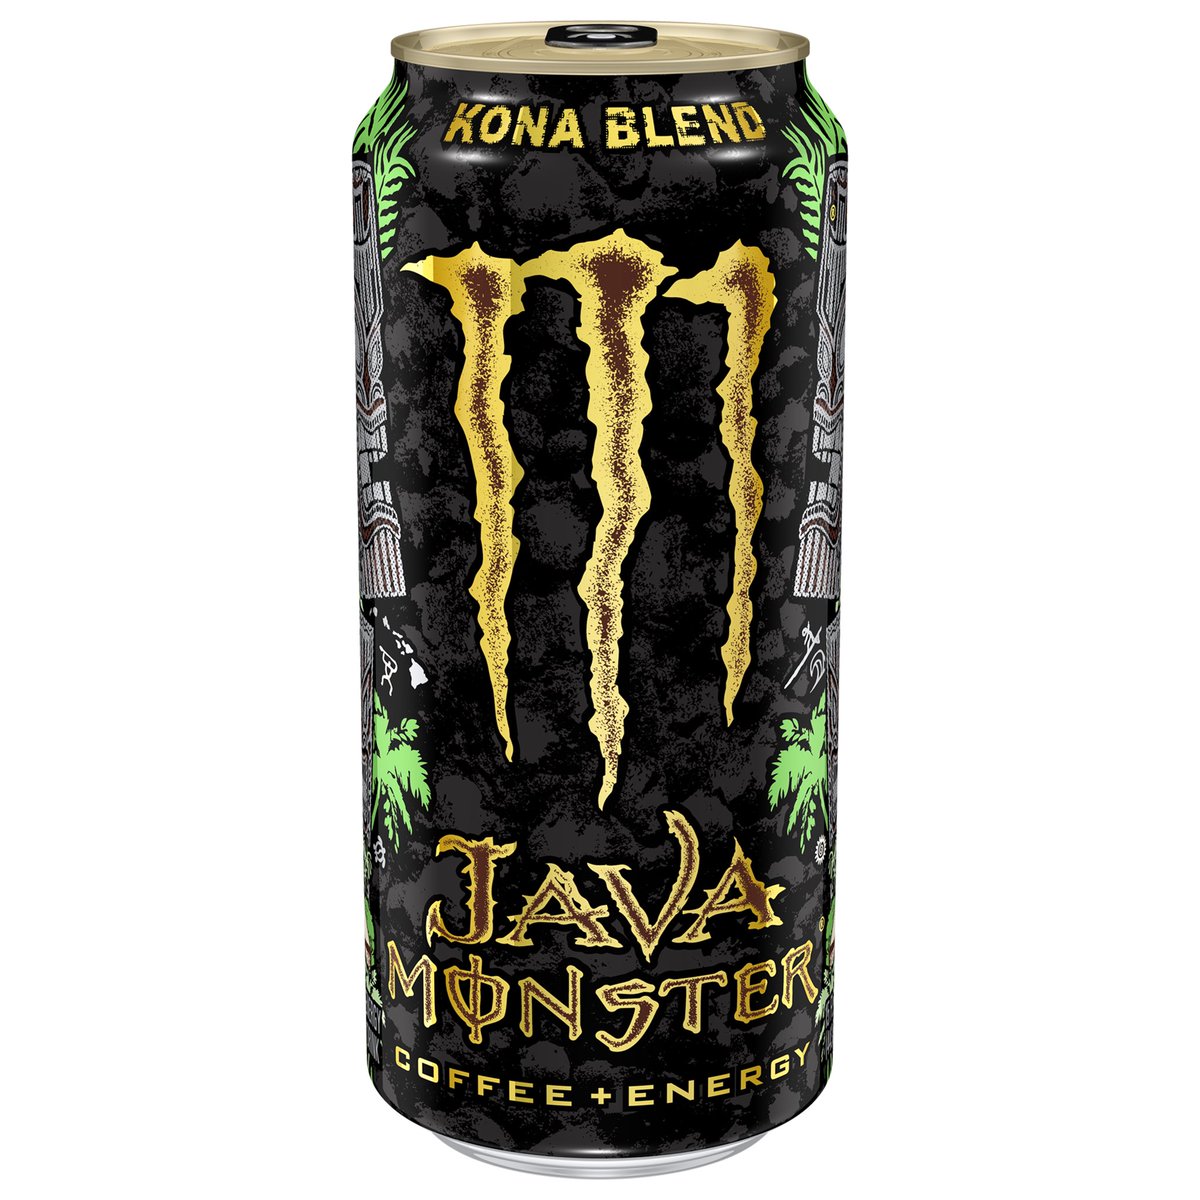 java kona blend (another ugly ass can)